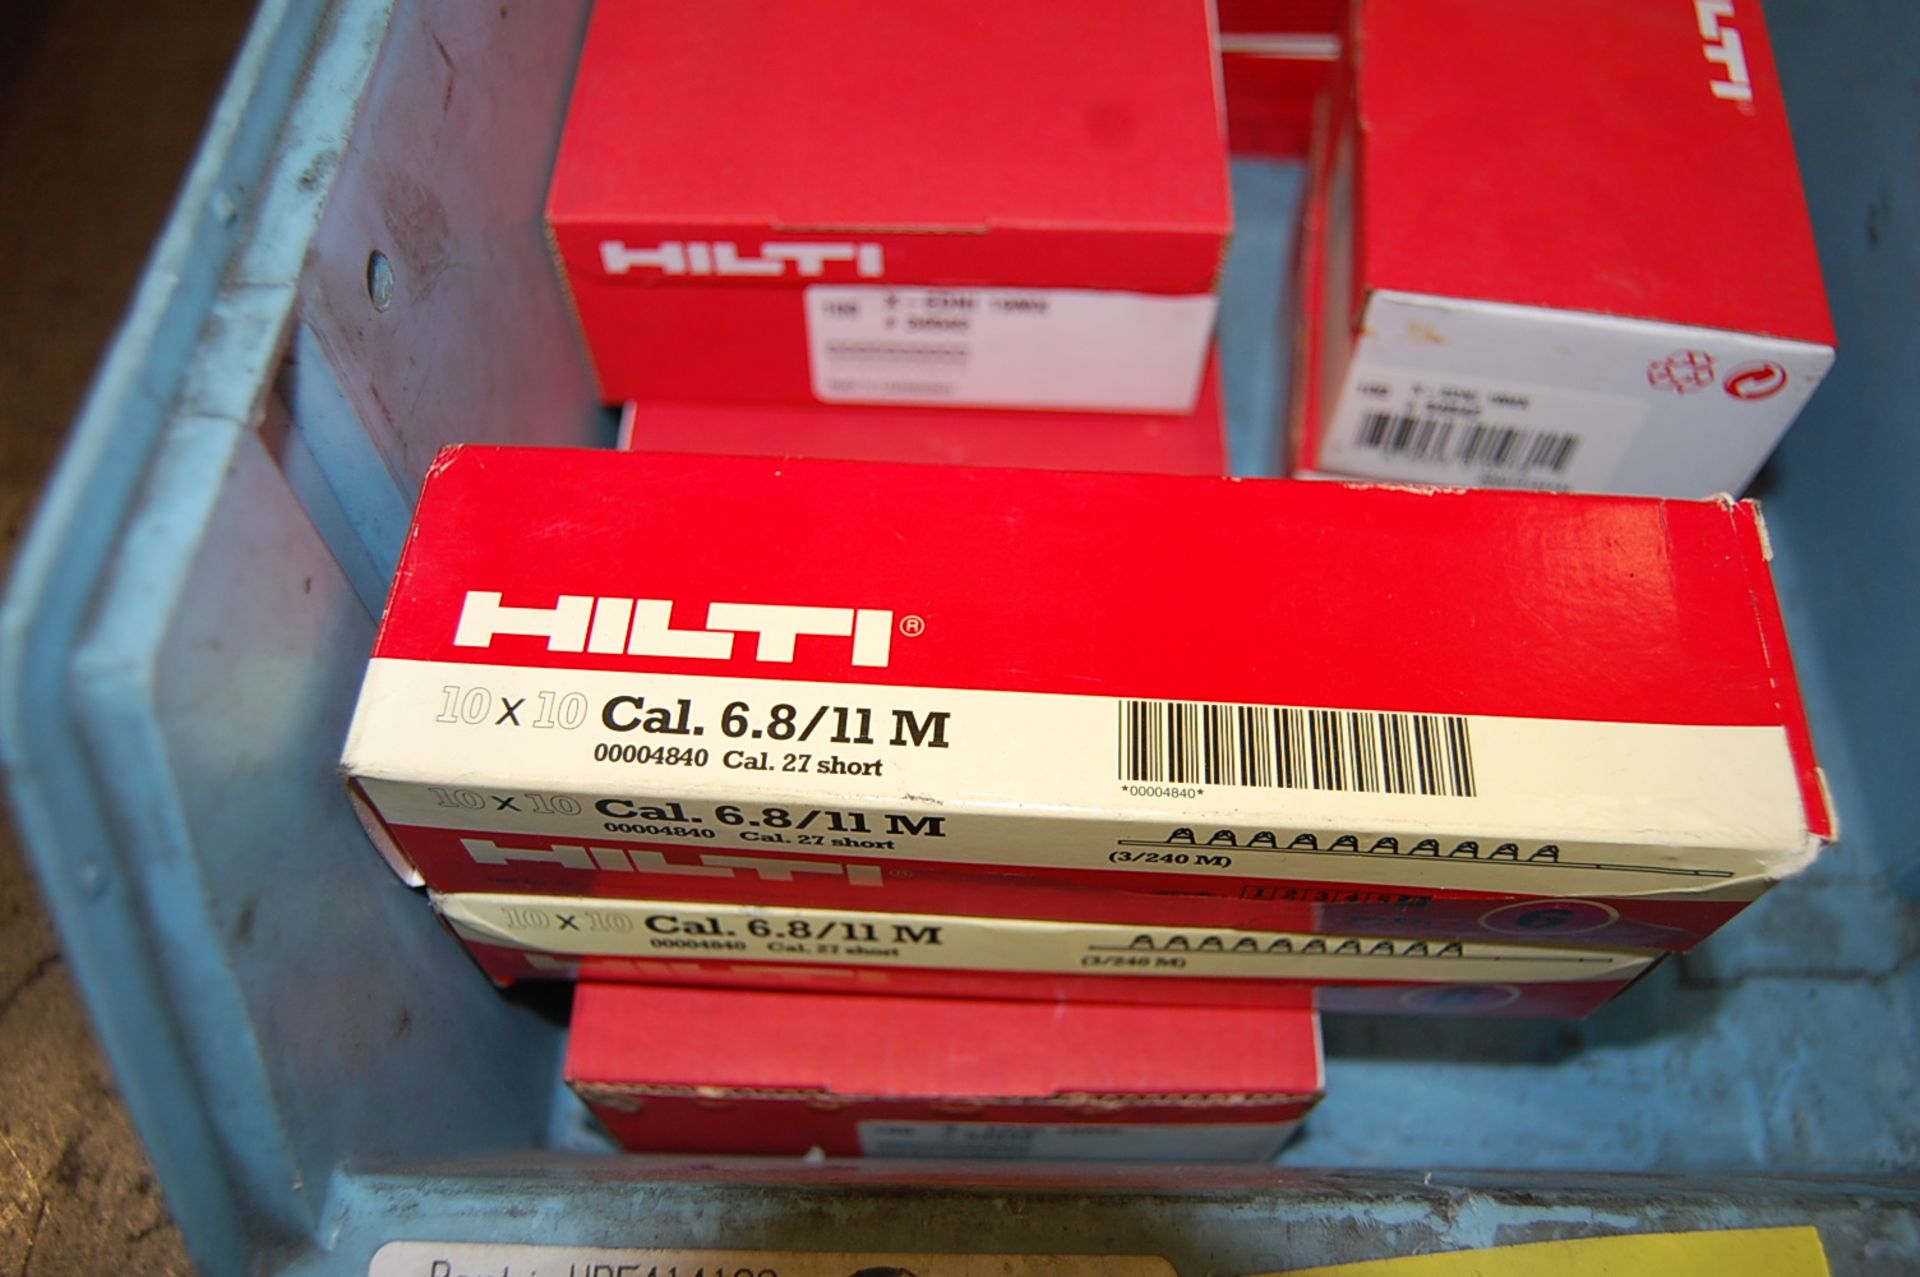 Hilti Model DX-460 Power Actuated Fastening System - Image 6 of 8